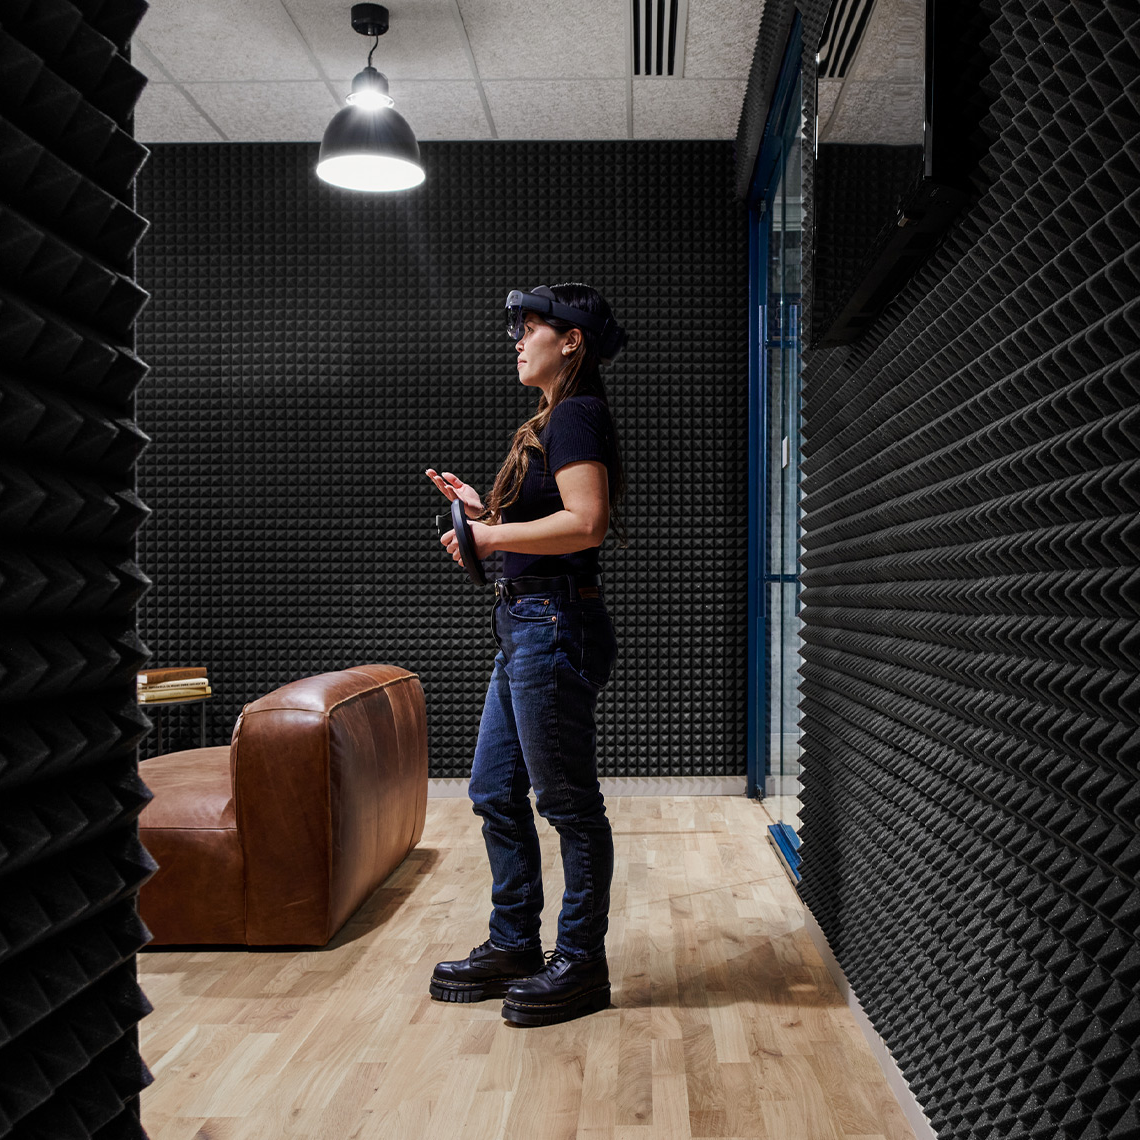 Woman with a VR headset on in a noise proof room